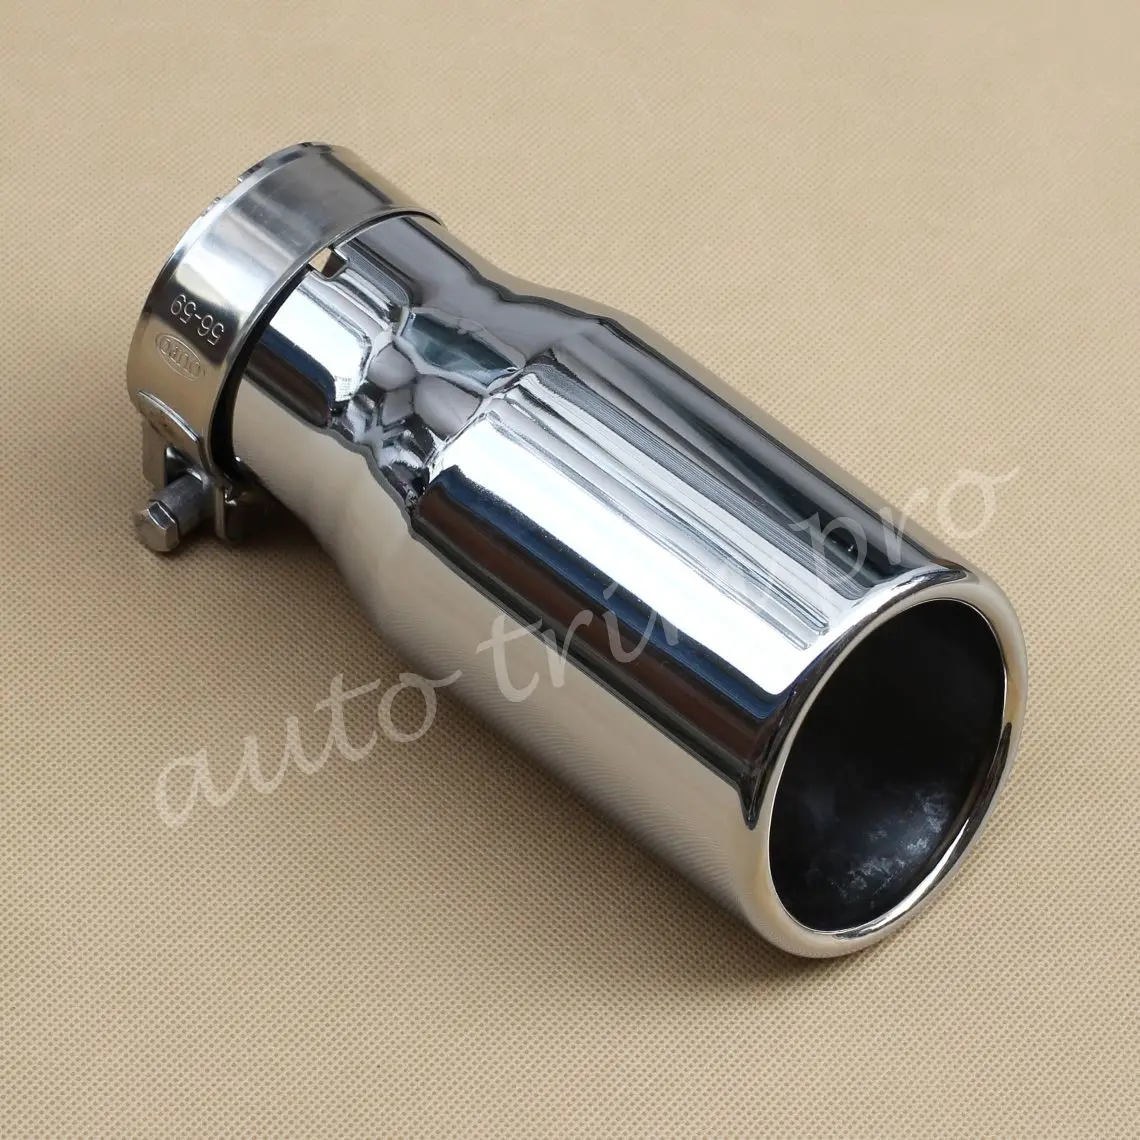 Fit For Jeep wrangler 2007-2016 Accessories Tail Exhaust Muffler Rear Tip Pipe